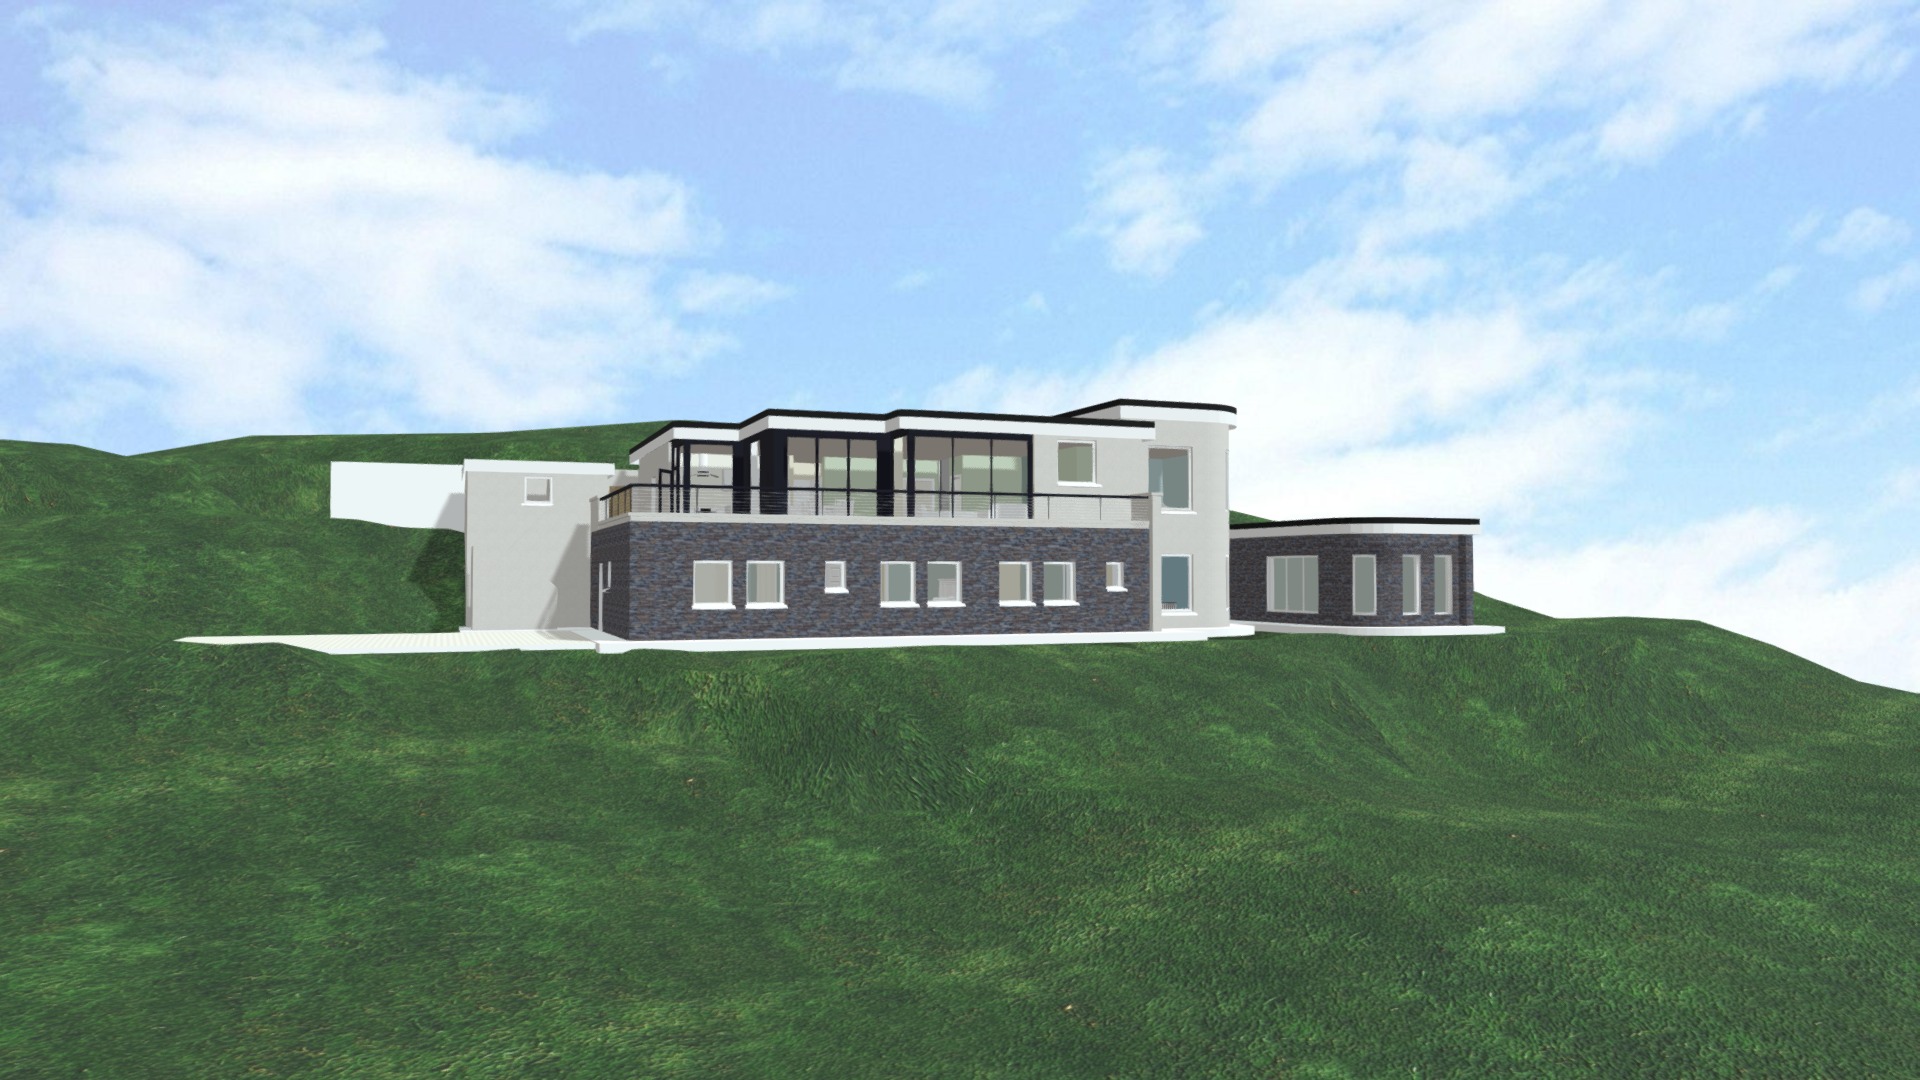 3D model Modern House on Terrain - This is a 3D model of the Modern House on Terrain. The 3D model is about a house on a grassy hill.